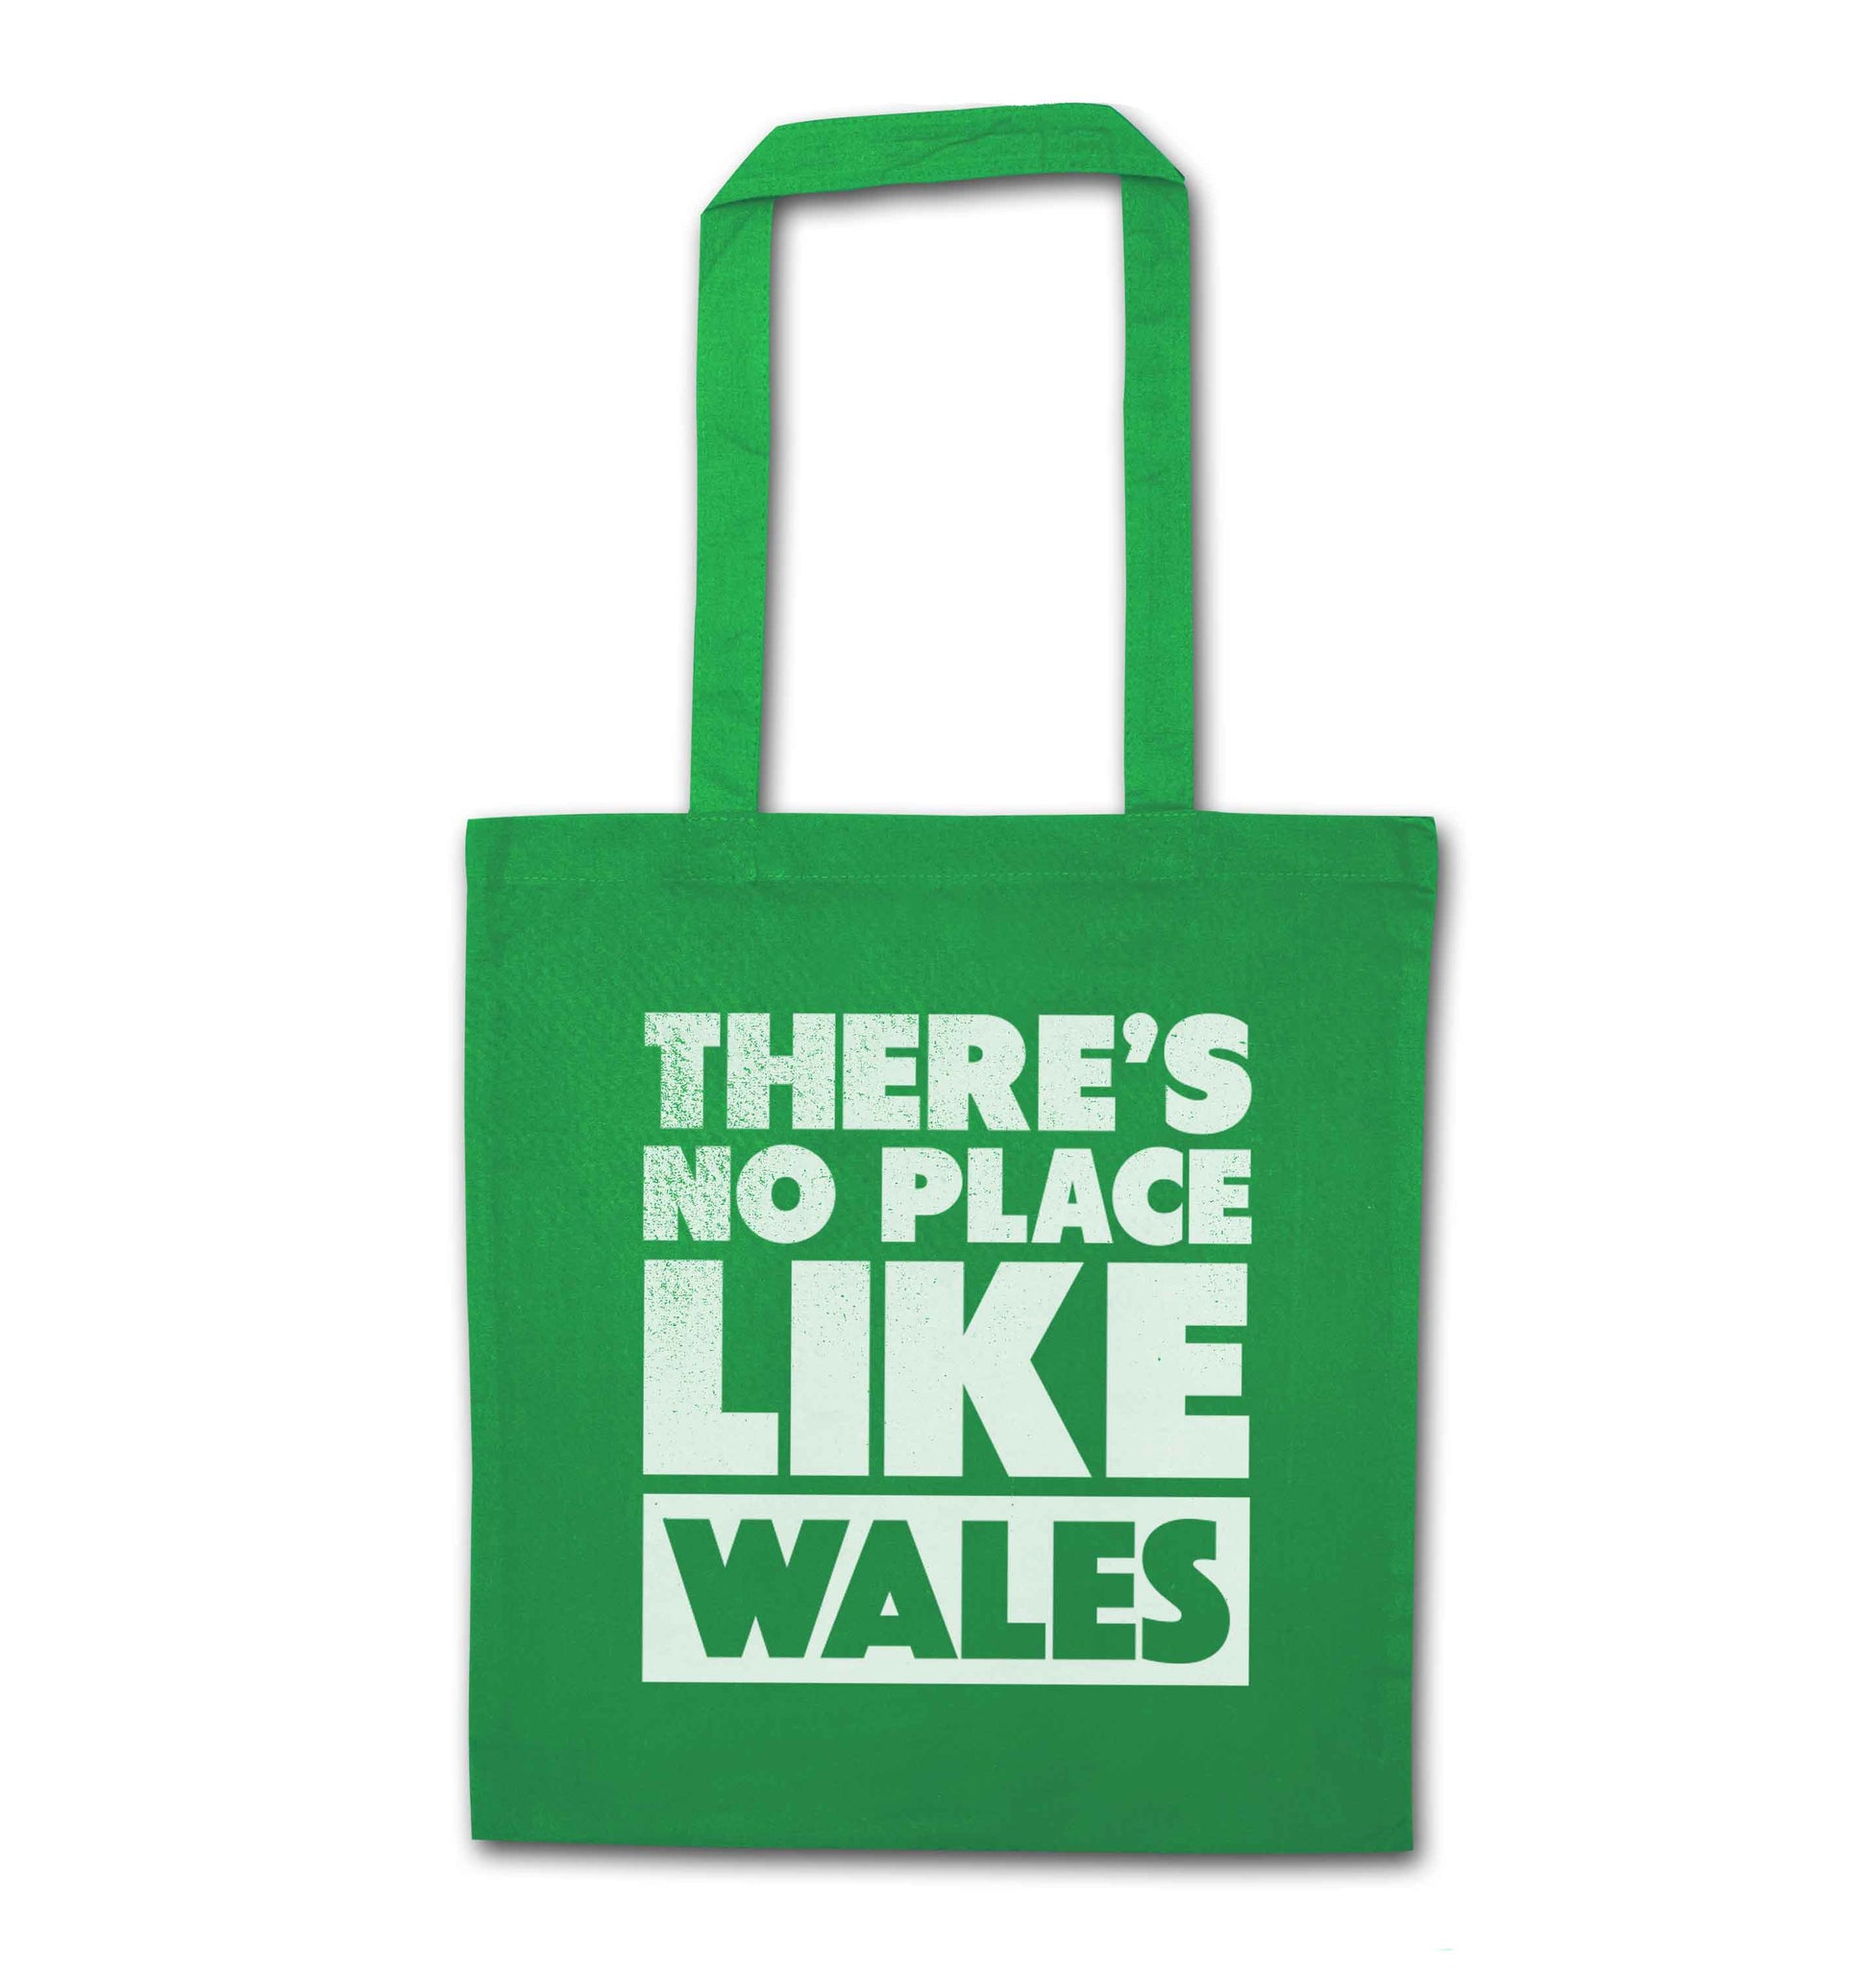 There's no place like Wales green tote bag